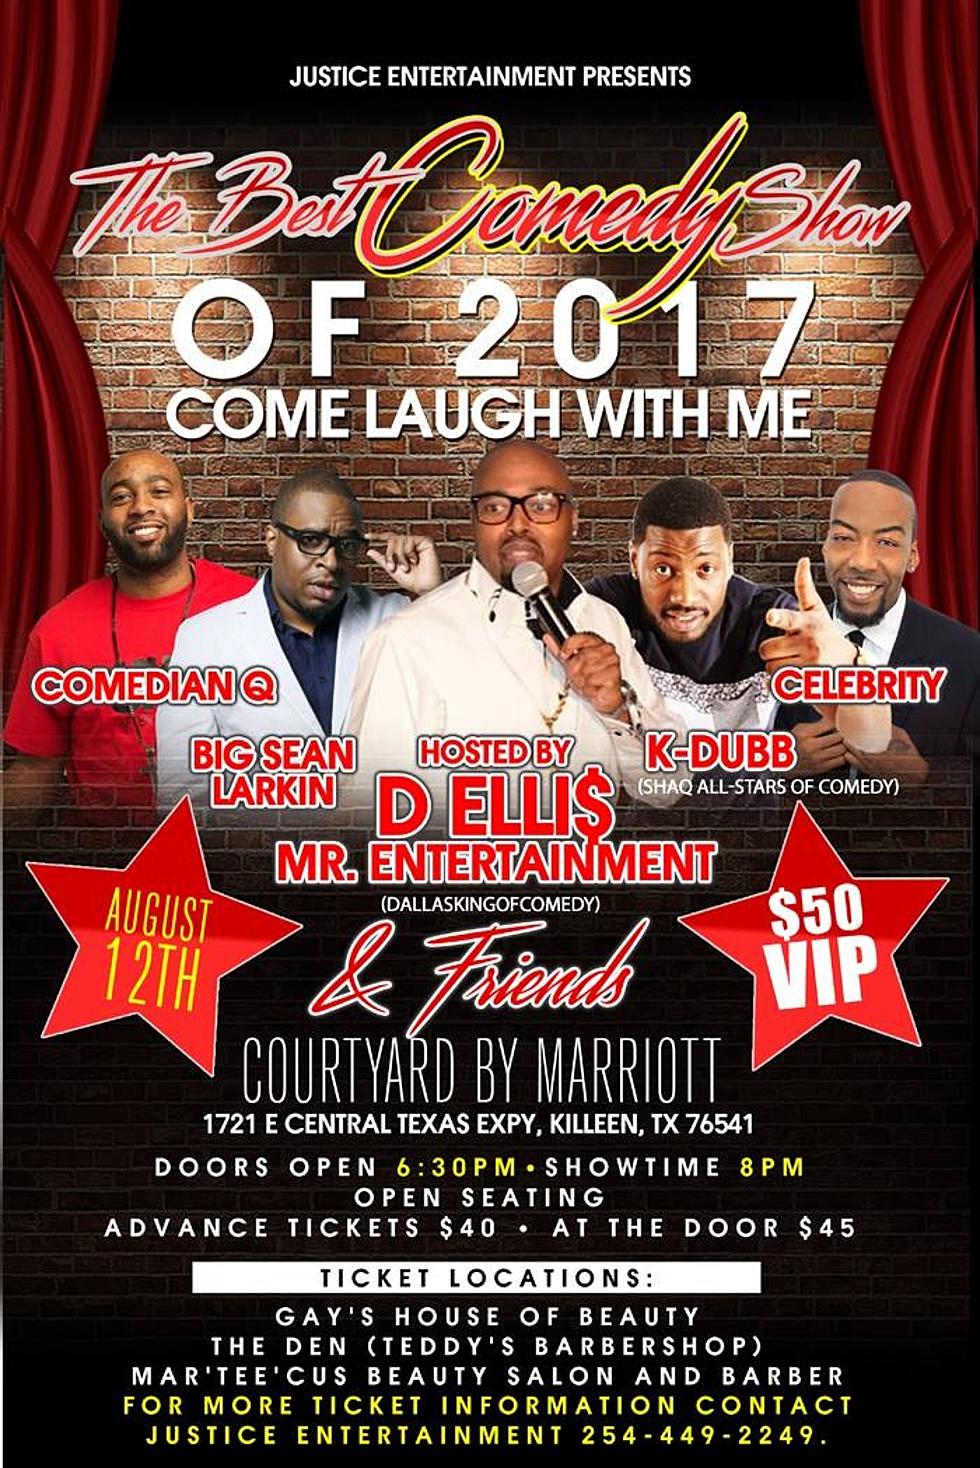 Justice Entertainment Presents “Come Laugh At Me” August 12th at the Courtyard by Marriott!